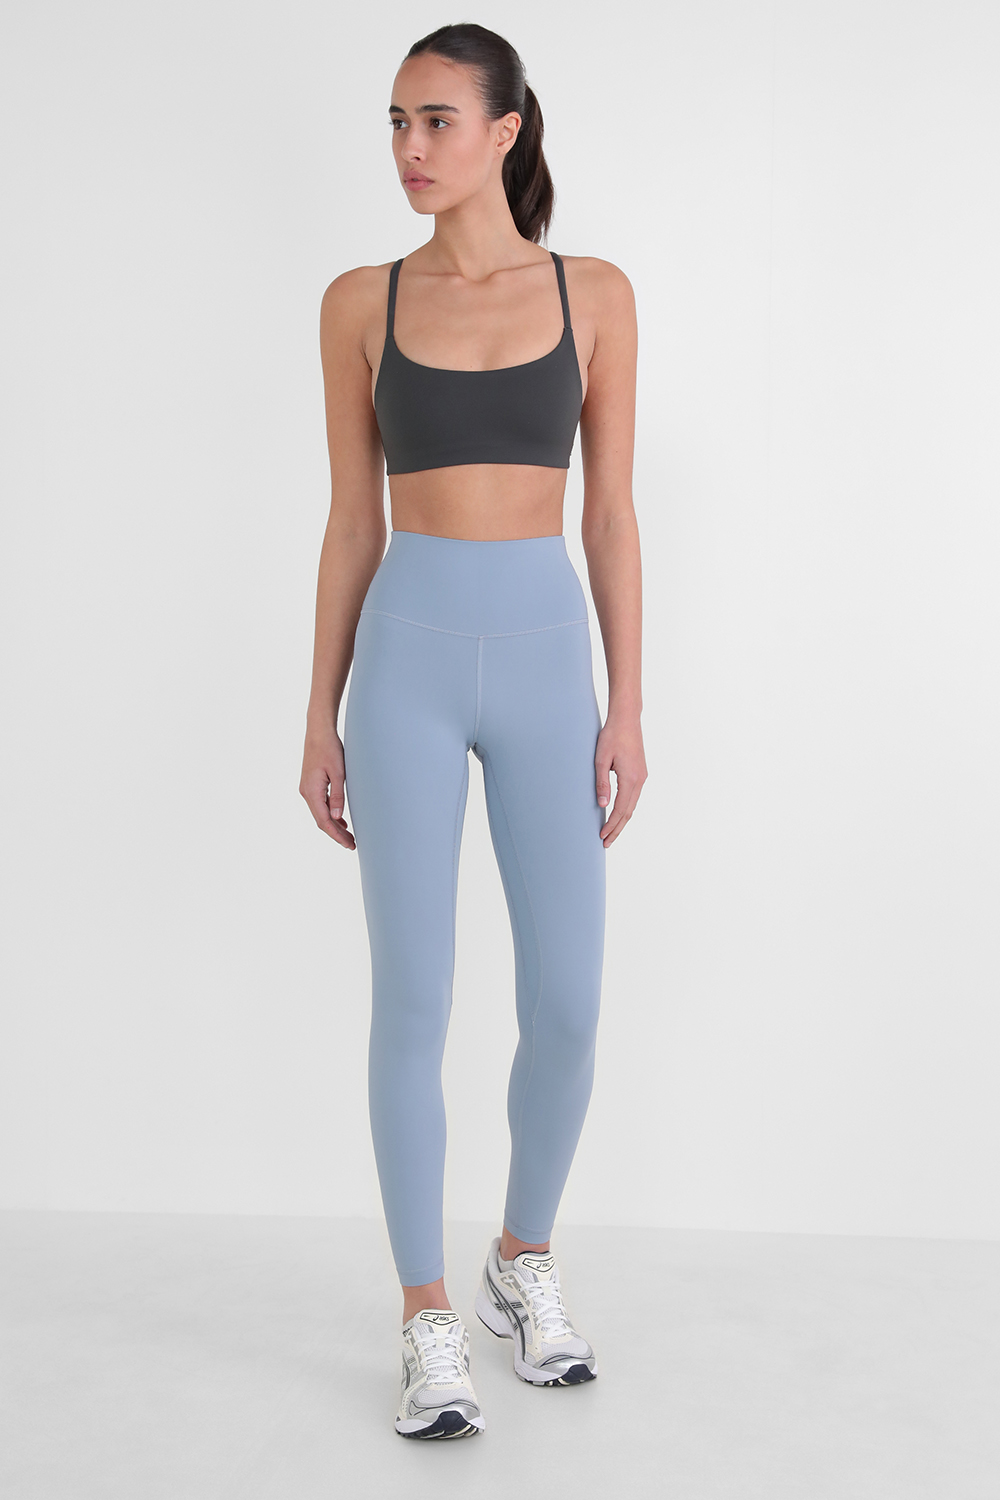 Wunder Train Strappy Racer Bra Light Support, A/B Cup Twill LULULEMON